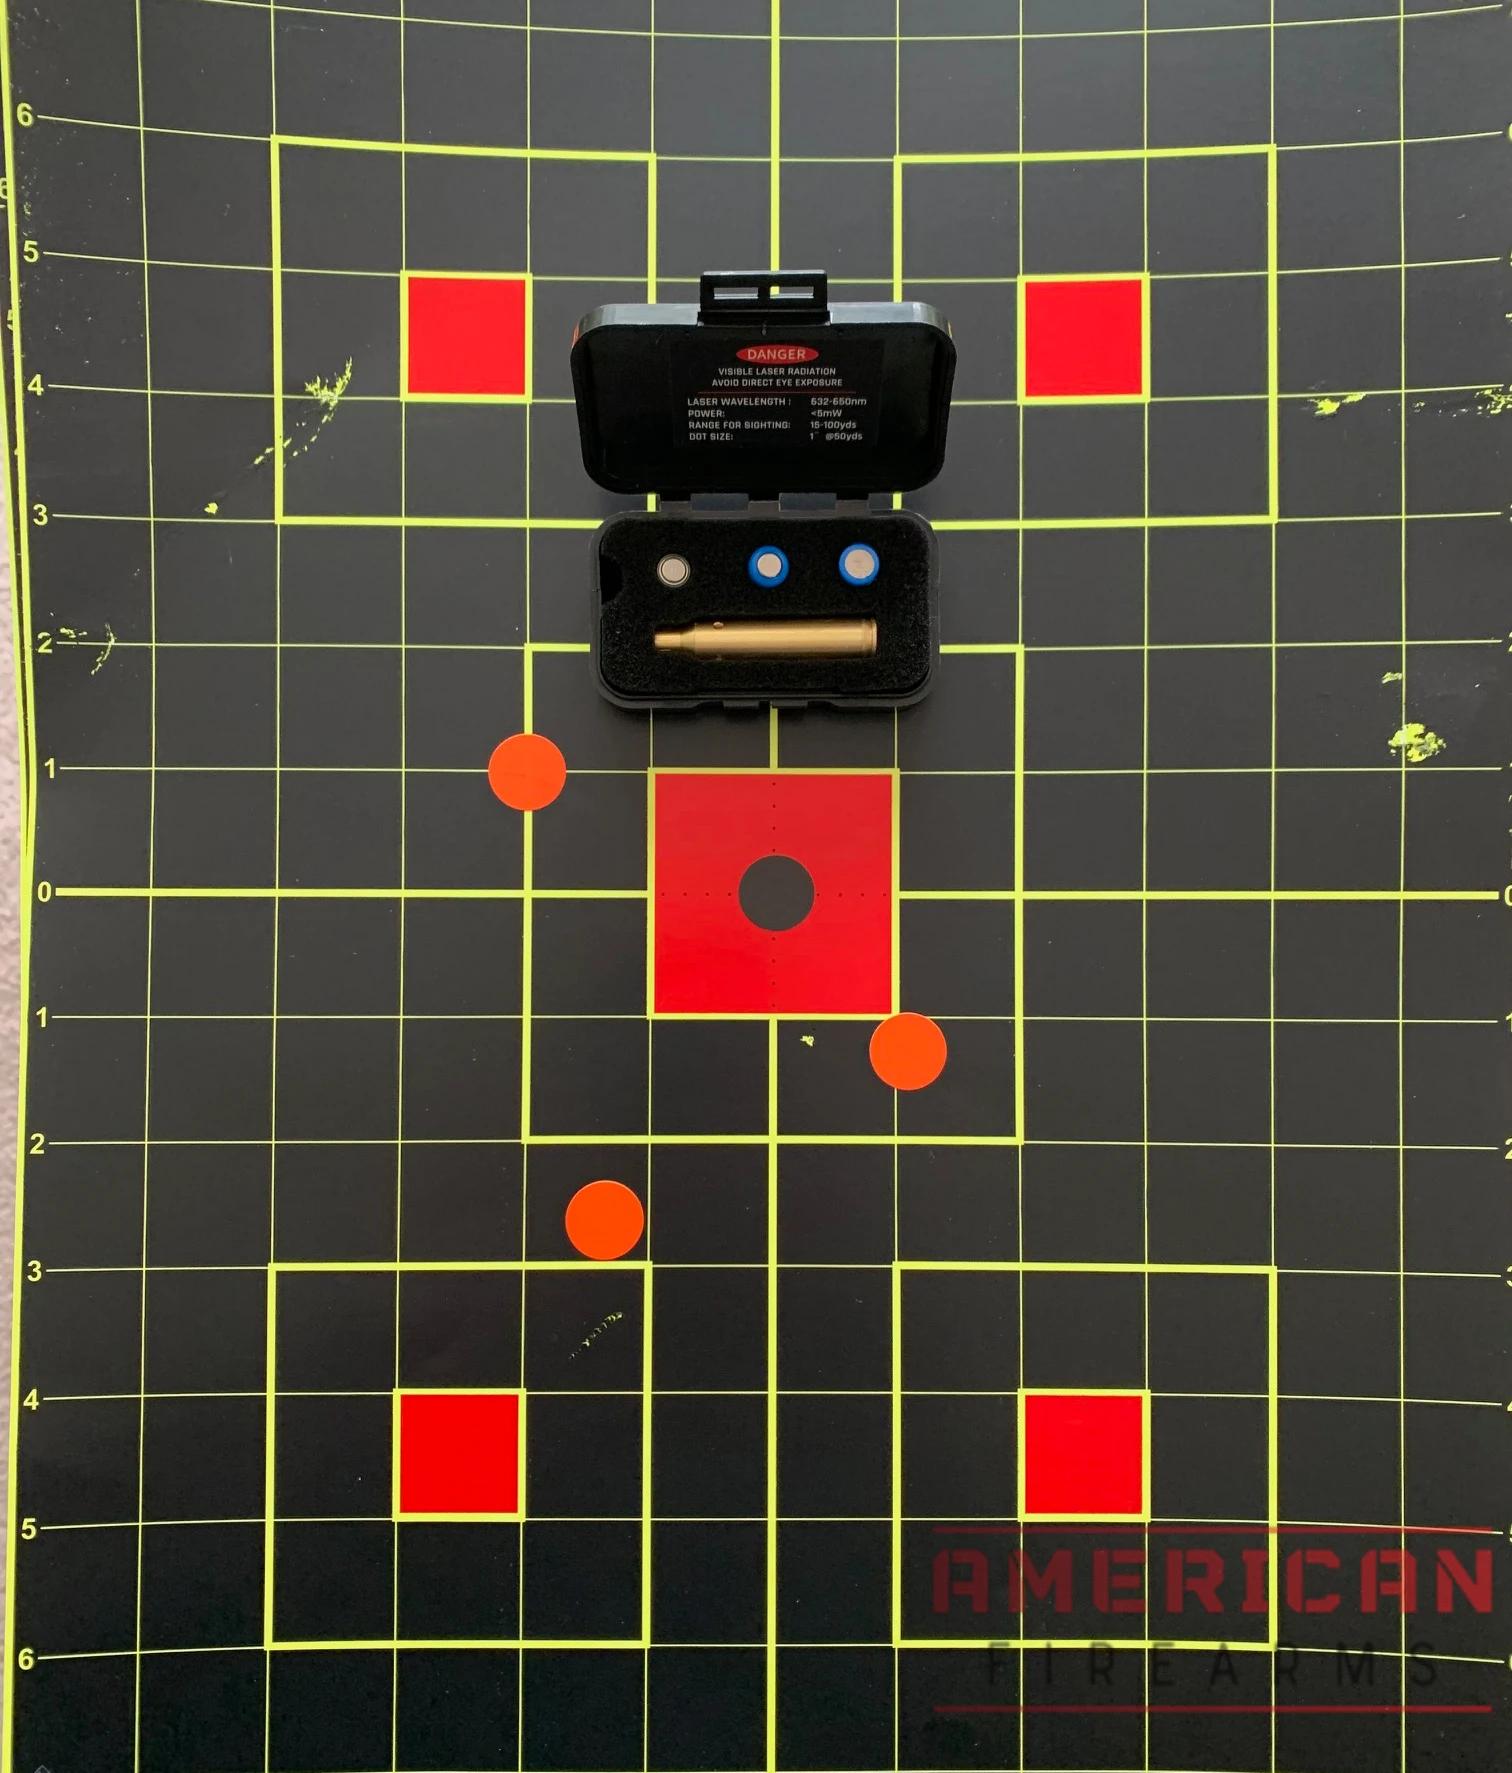 The StrongTools unit was consistently within 2-3 inches of the bullseye, with 4 inches of spread between the various tests (red dots).